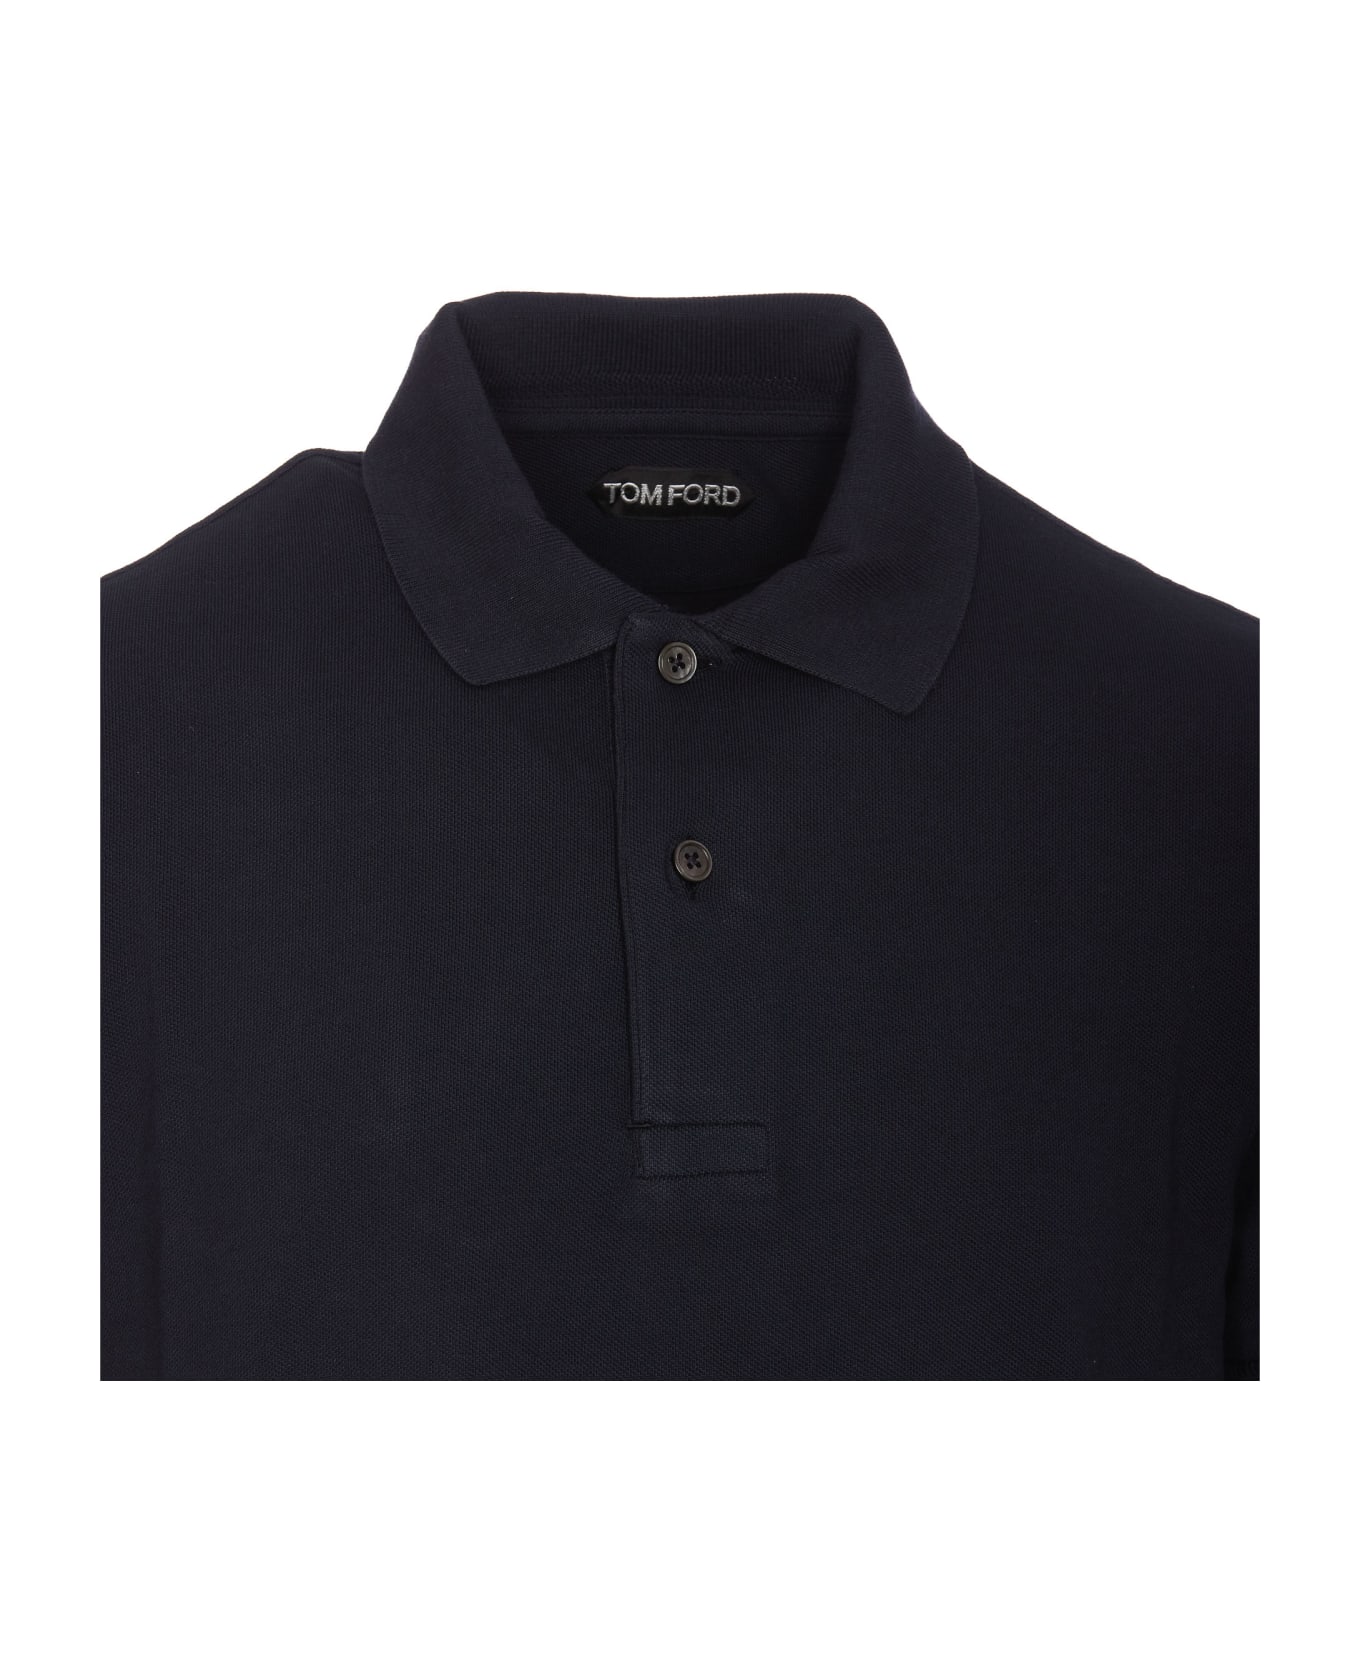 Tom Ford Polo - Blue ポロシャツ